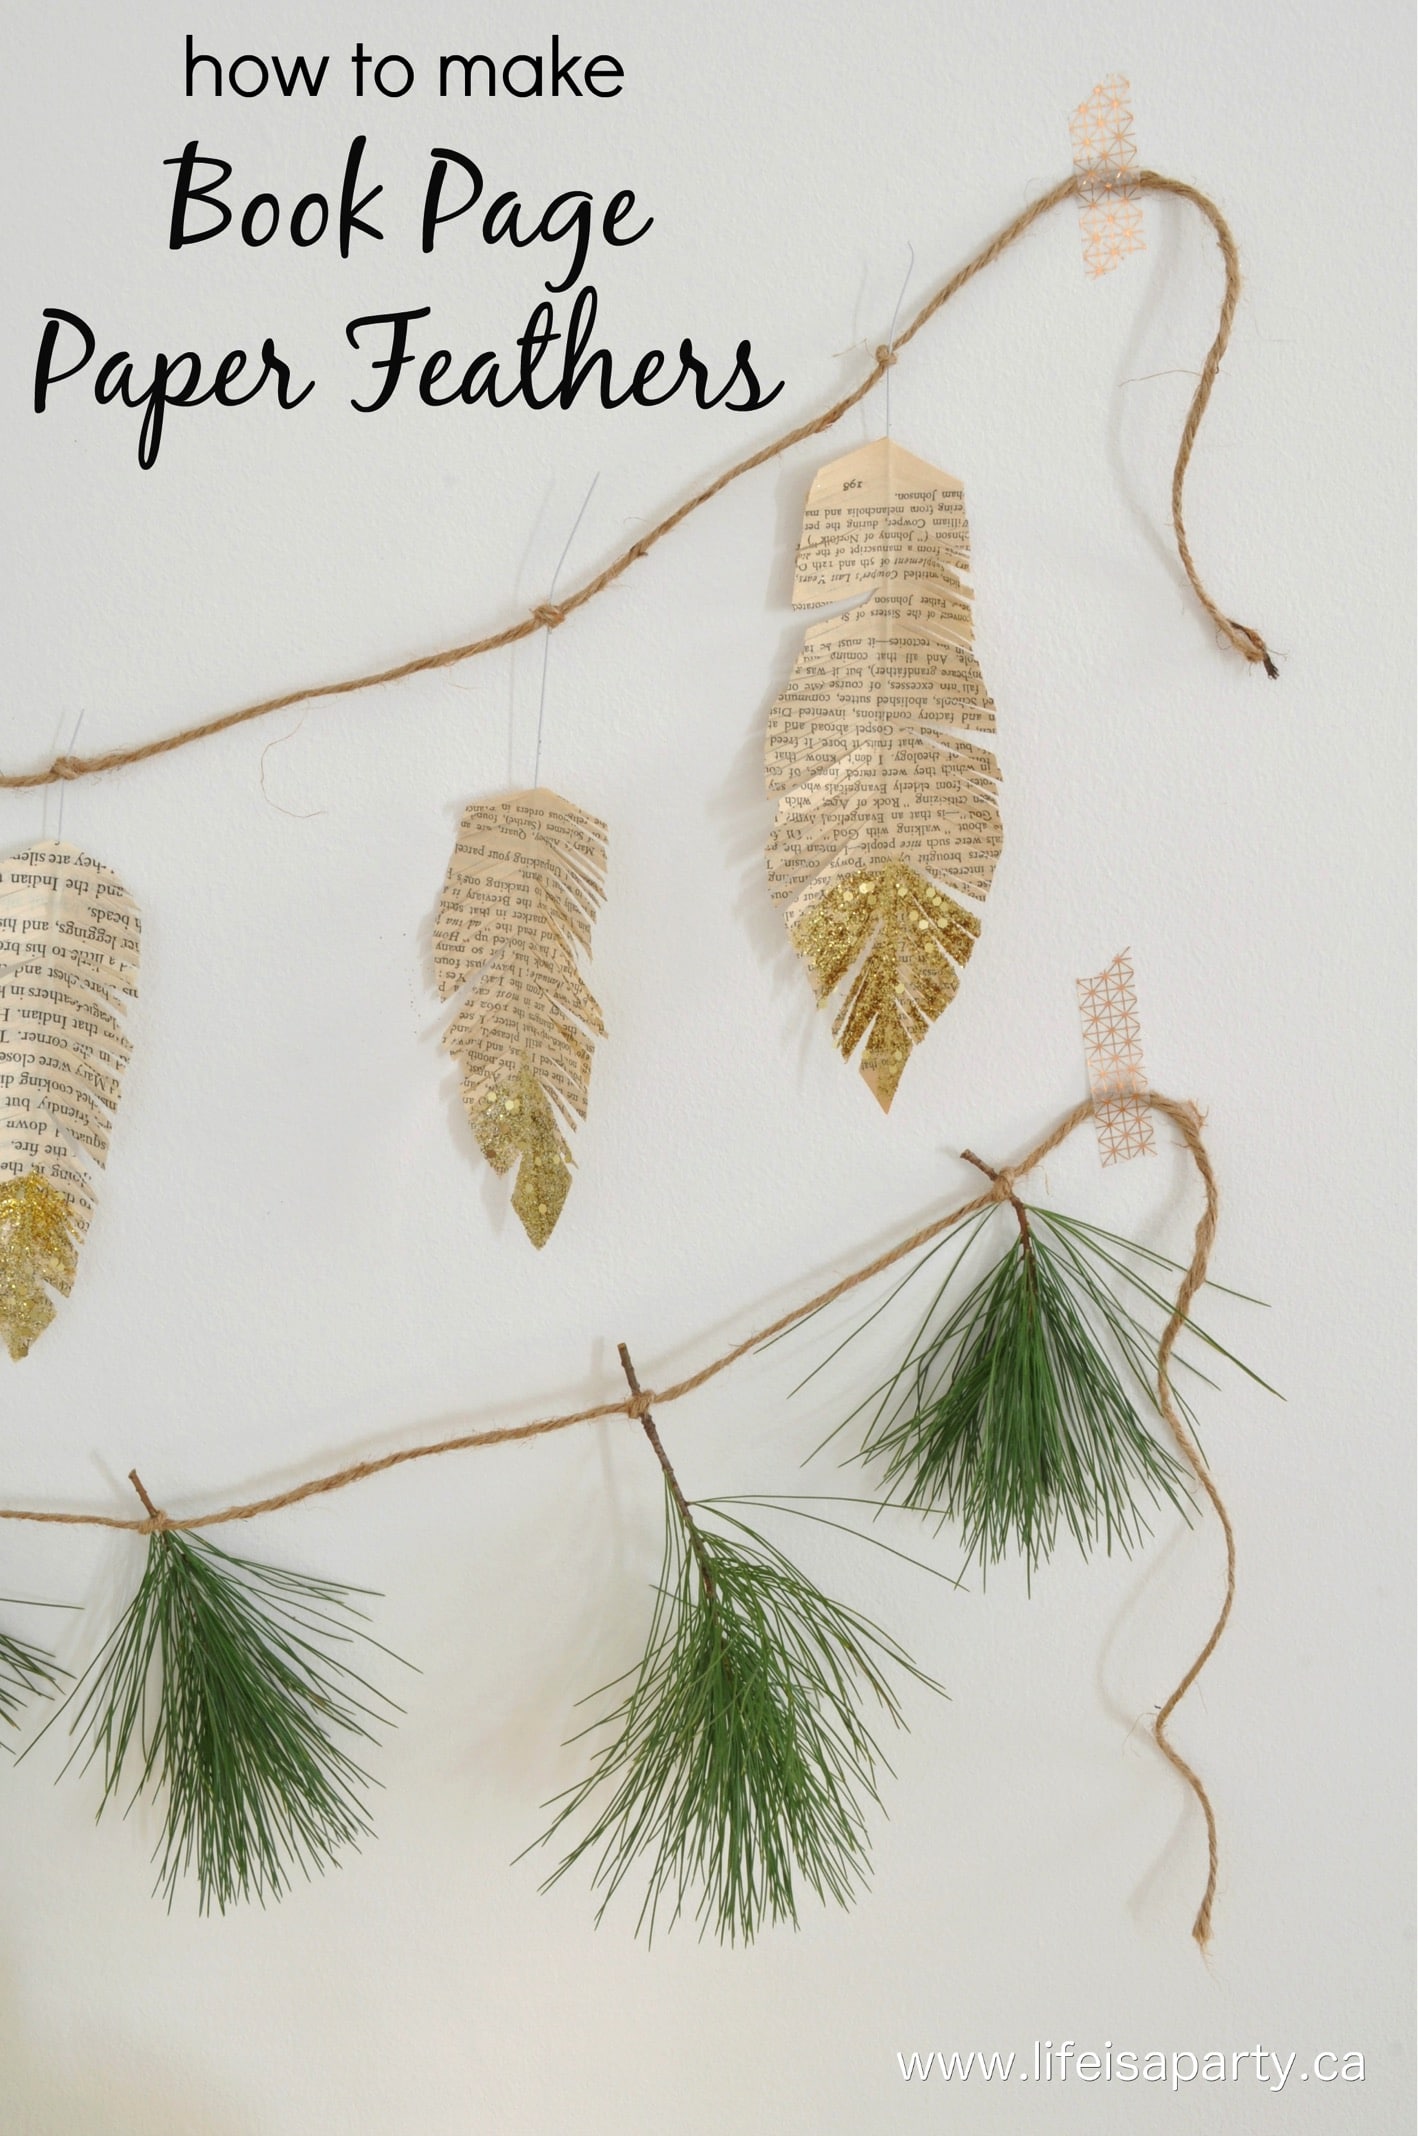 How To Make Book Page Paper Feathers: using old book pages, a glue stick and a wire for a center make beautiful paper feathers.